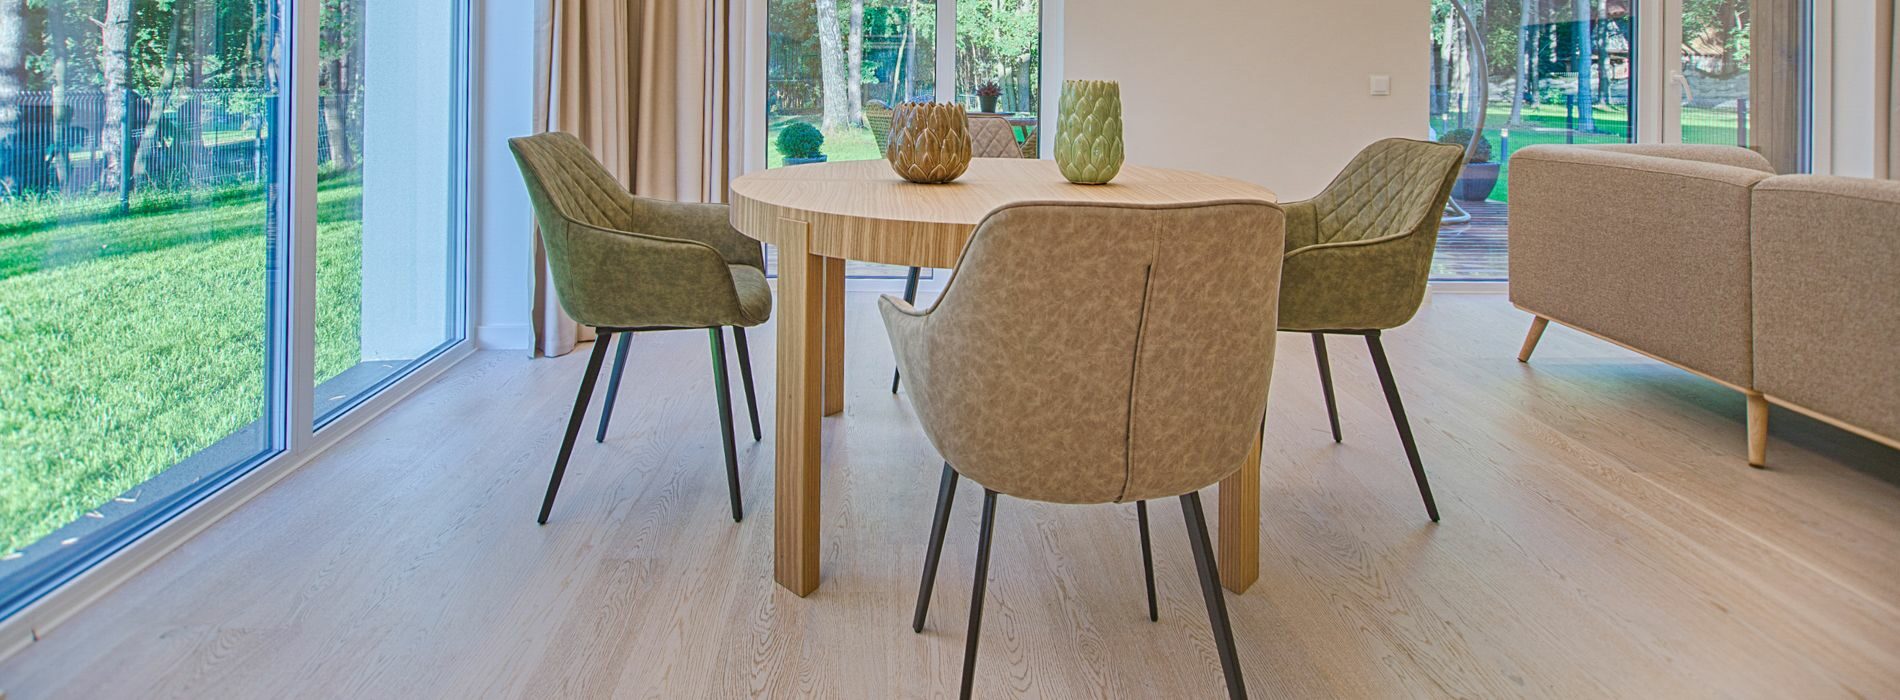 Experience the remarkable revival of 7-year-old engineered oak floors in Chiswick. Our expert floor sanding team revitalized the tired surfaces, revealing their timeless charm. Through a gentle mid-oak stain, we enhanced their inherent grace while preserving their individuality. To ensure enduring strength, we meticulously applied four coats of Junckers Strong in a satin finish, establishing a protective barrier against daily wear. These exquisite floors, featuring a 4.1 mm top layer thickness, combine aesthetic allure with long-lasting resilience.